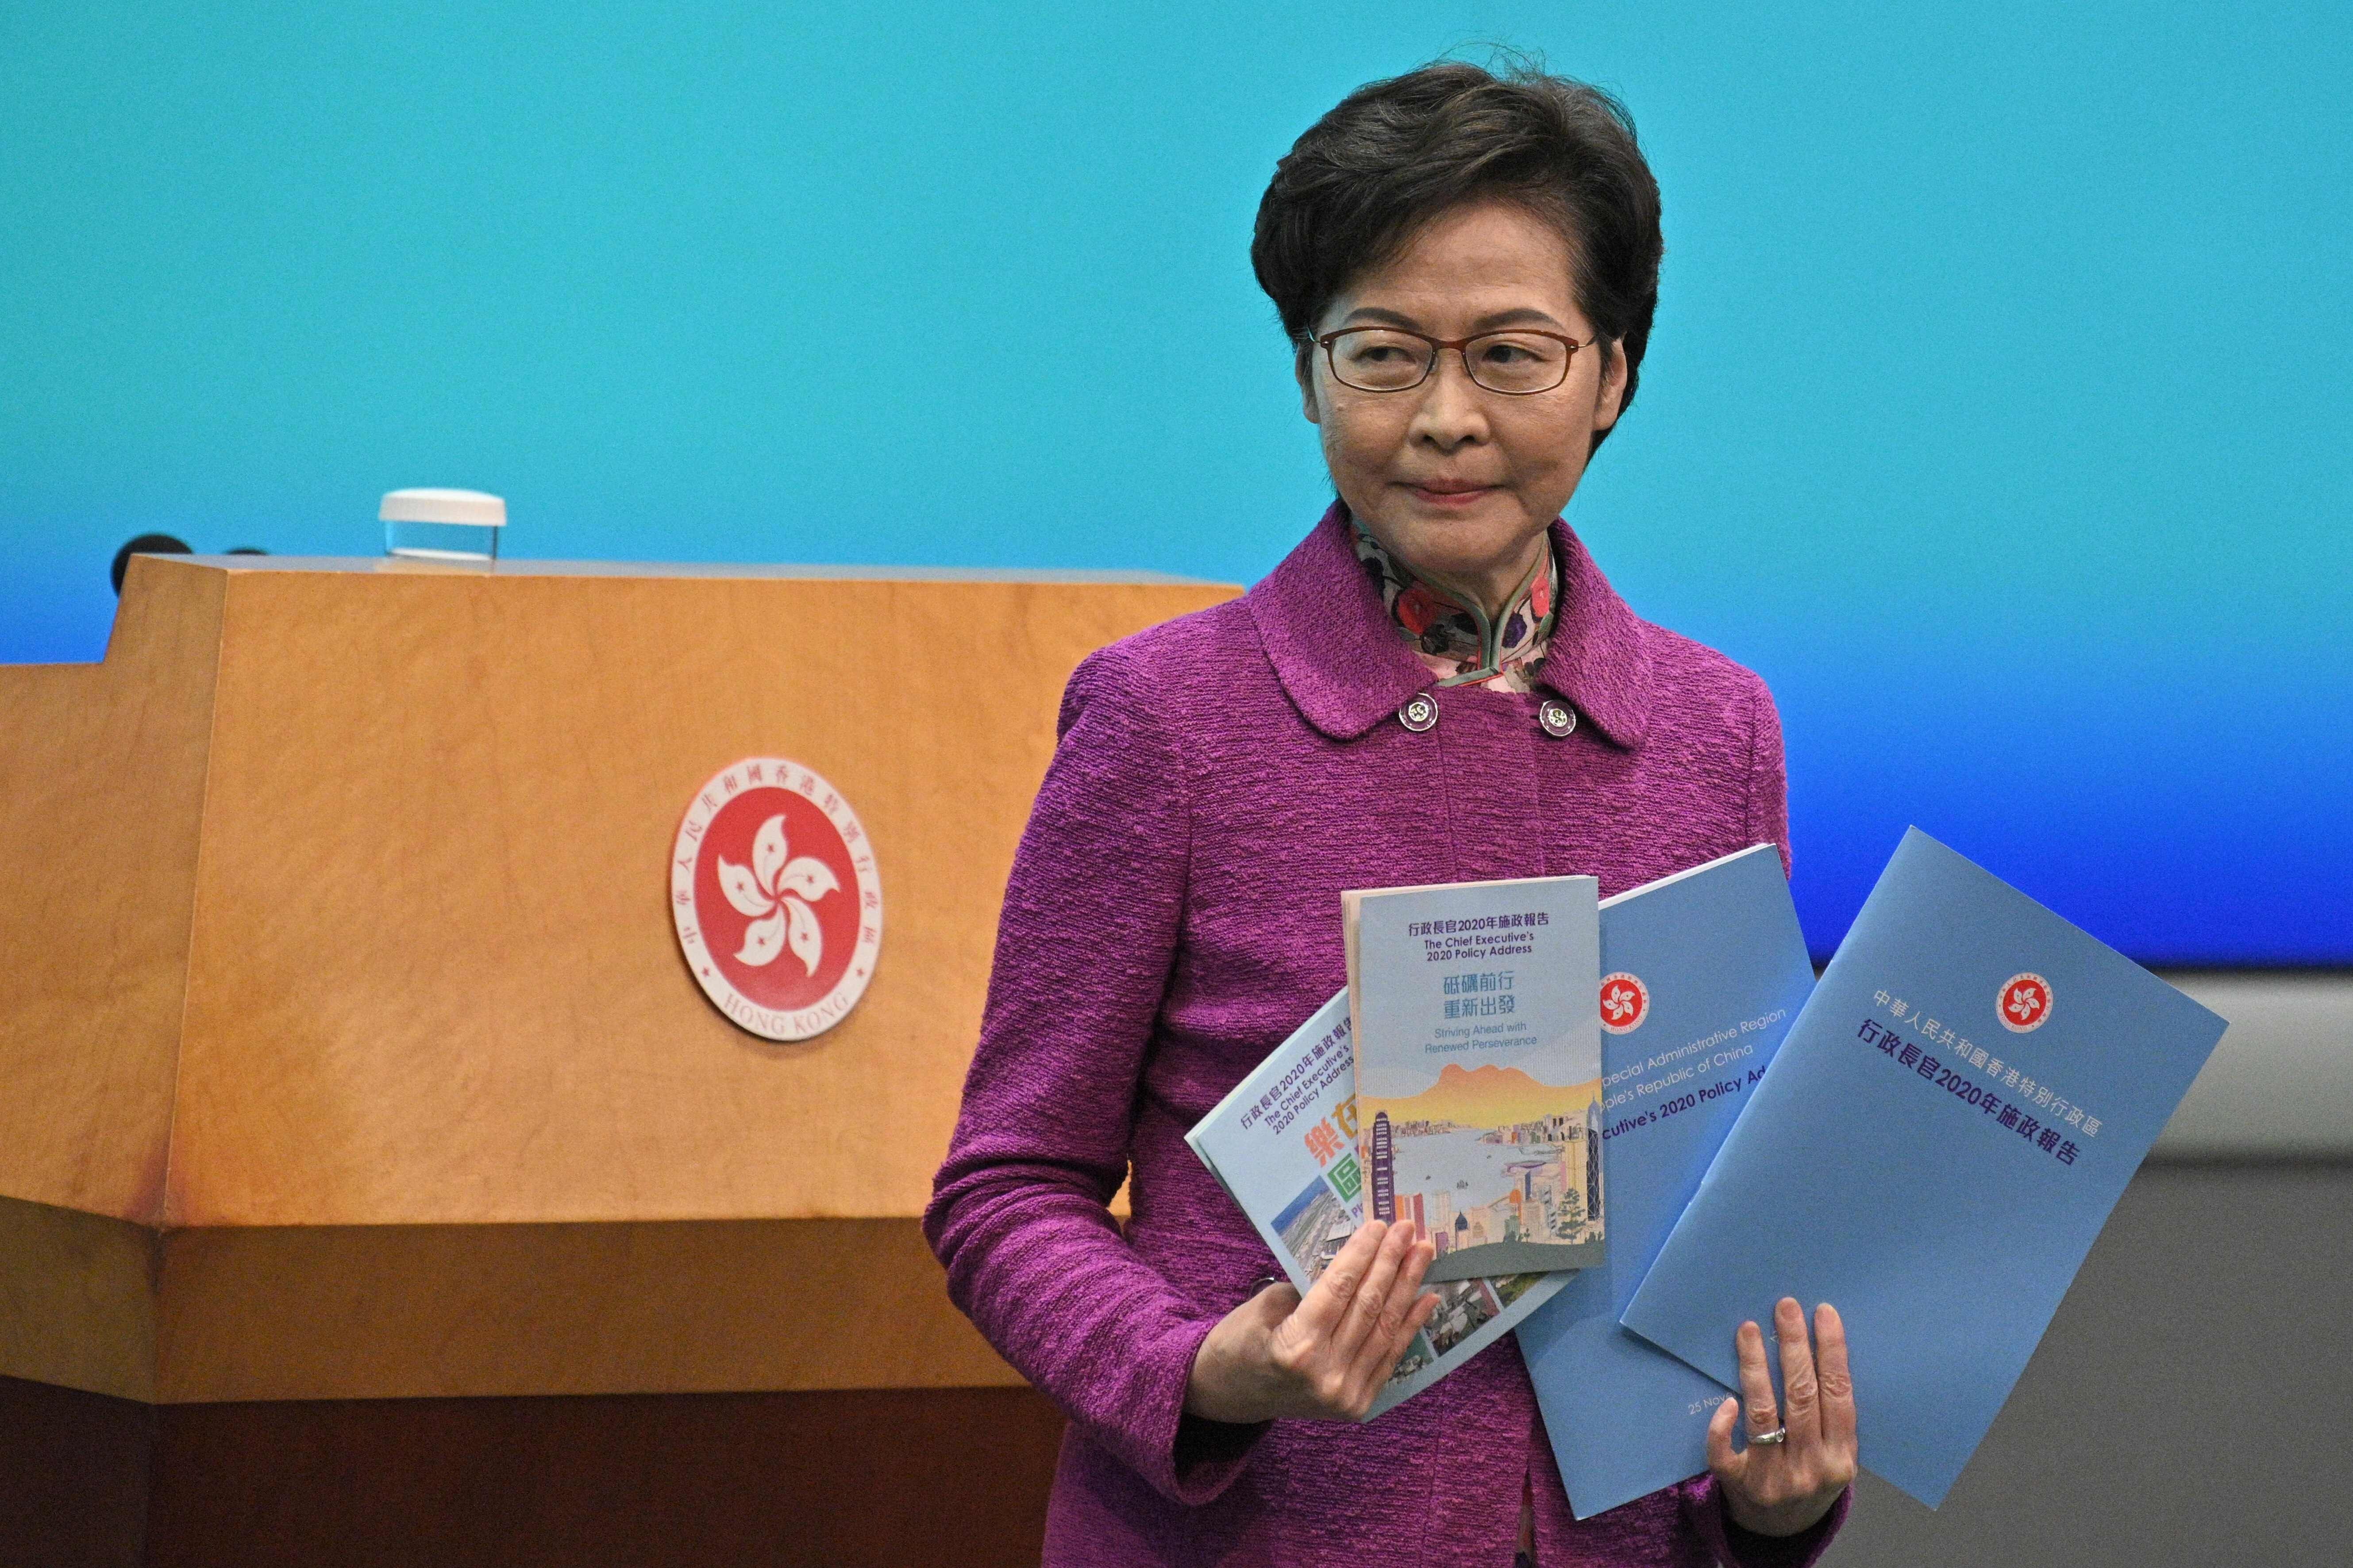 Chief Executive Carrie Lam arrives for a press conference at the Hong Kong government headquarters on November 25, after delivering her annual policy address at the Legislative Council. Photo: AFP